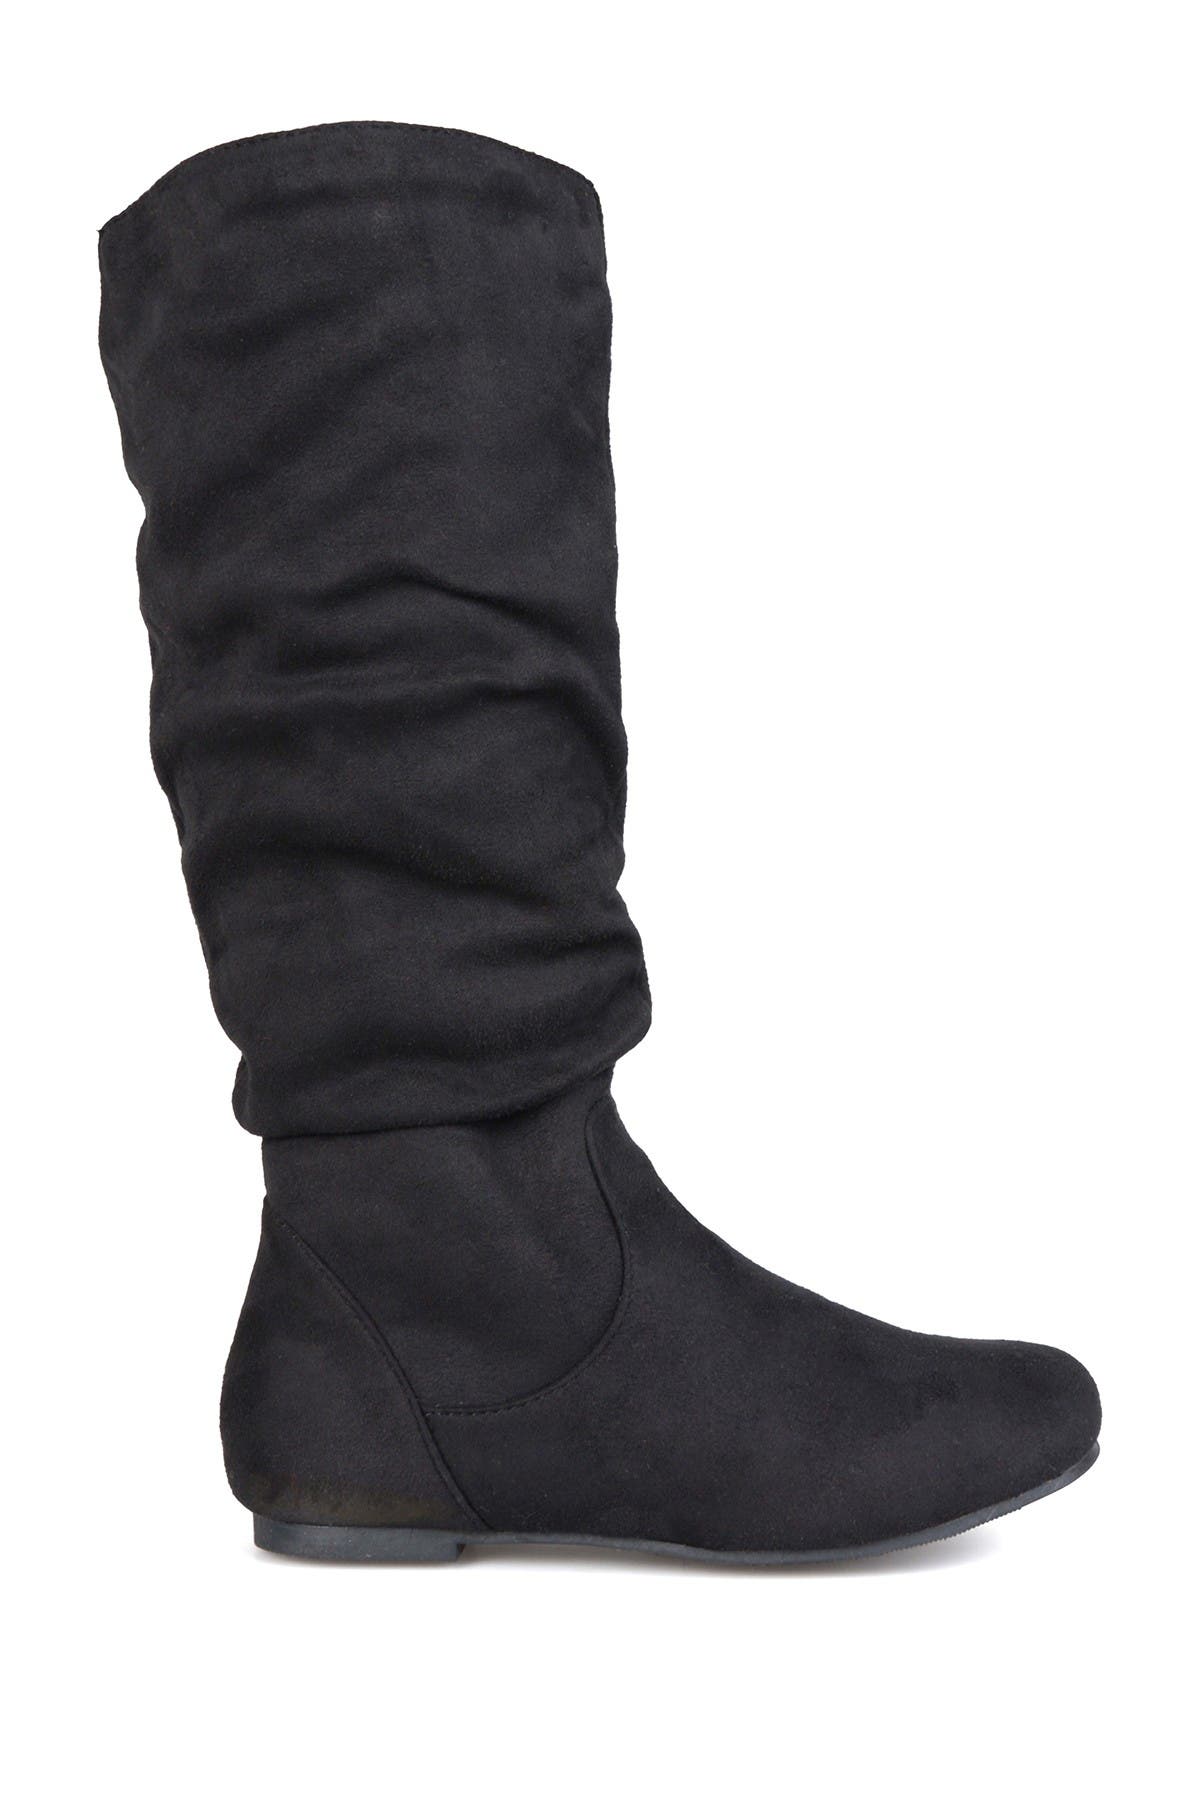 JOURNEE Collection | Rebecca Slouchy Riding Boot - Wide Calf ...